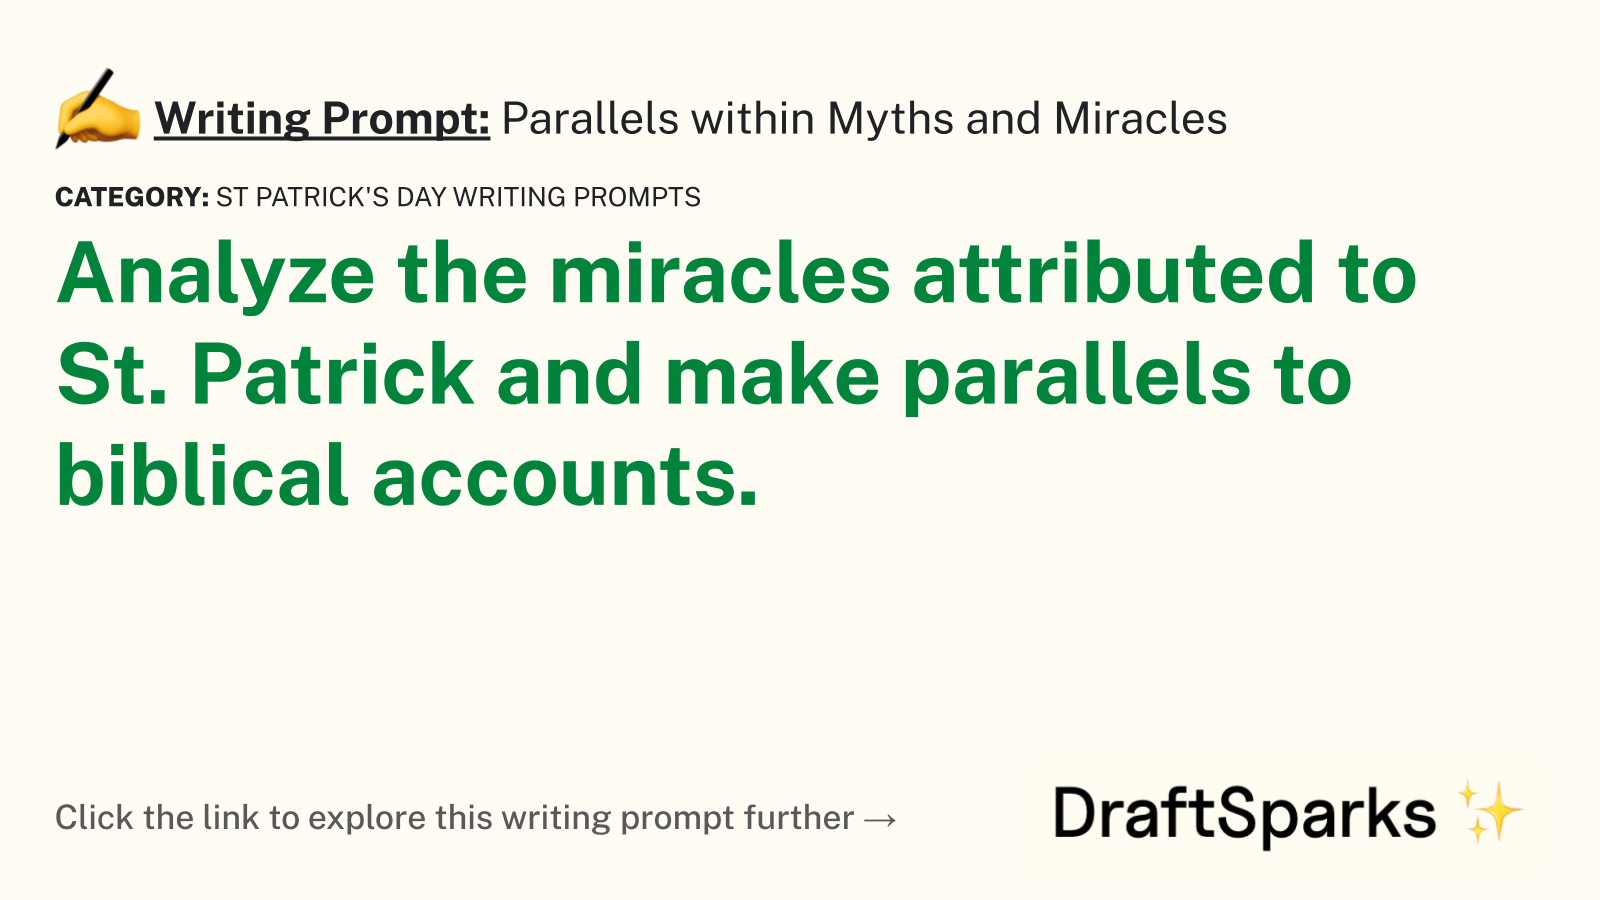 Parallels within Myths and Miracles